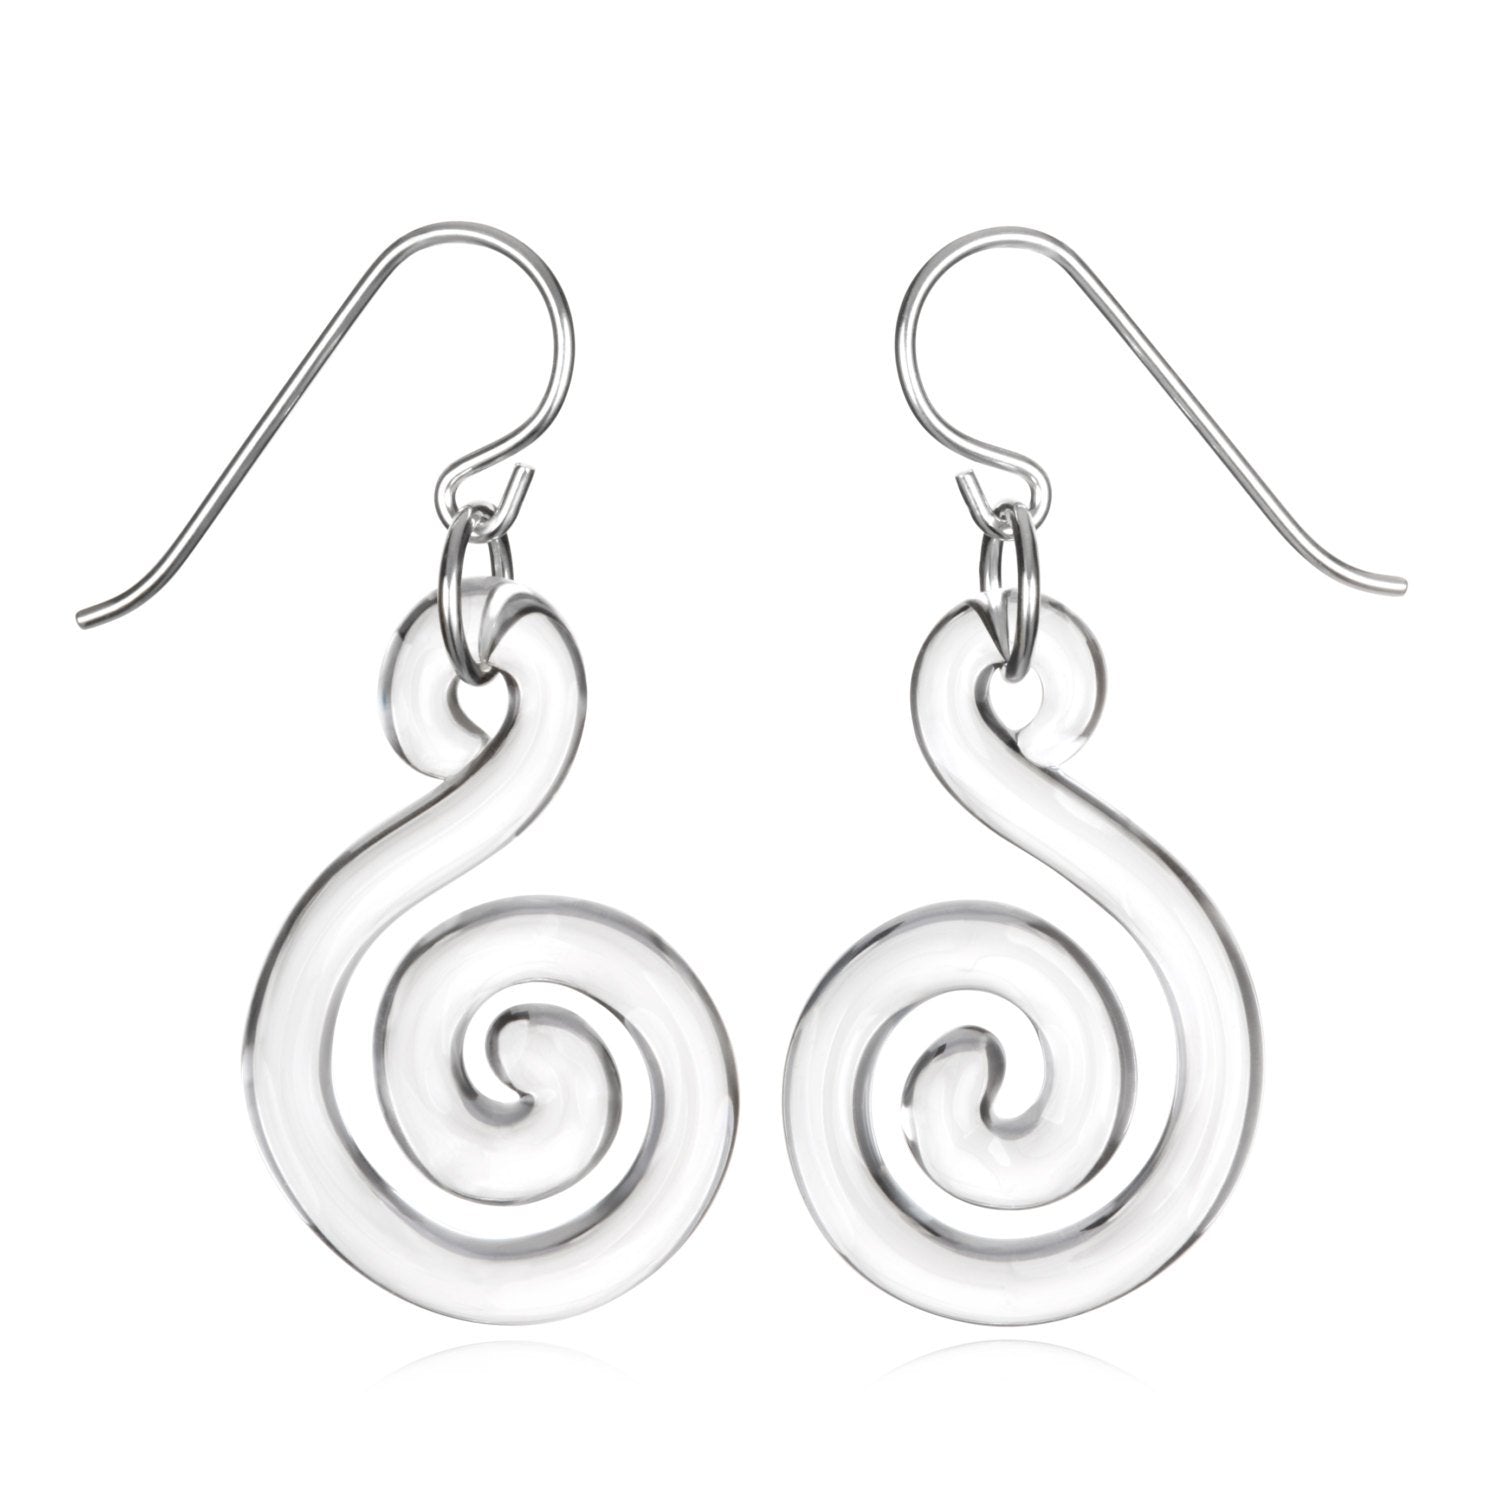 Glass Small Flat Spiral Earrings - Eclipse Gallery